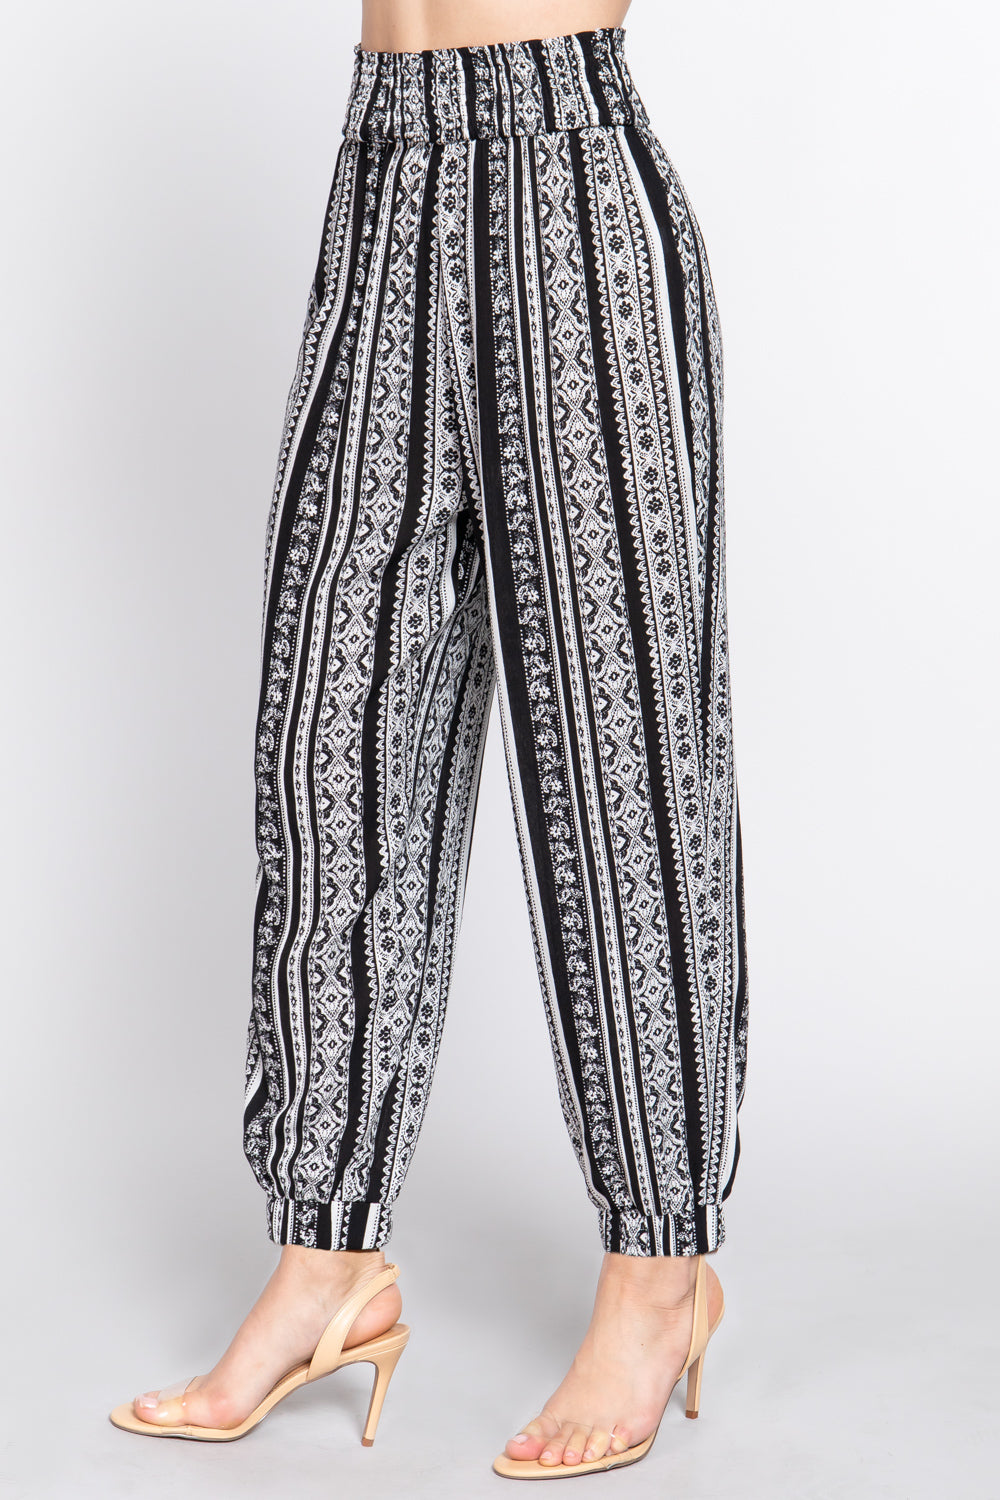 - Printed Jogger Pants - 2 styles - Ships from The US - womens joggers at TFC&H Co.